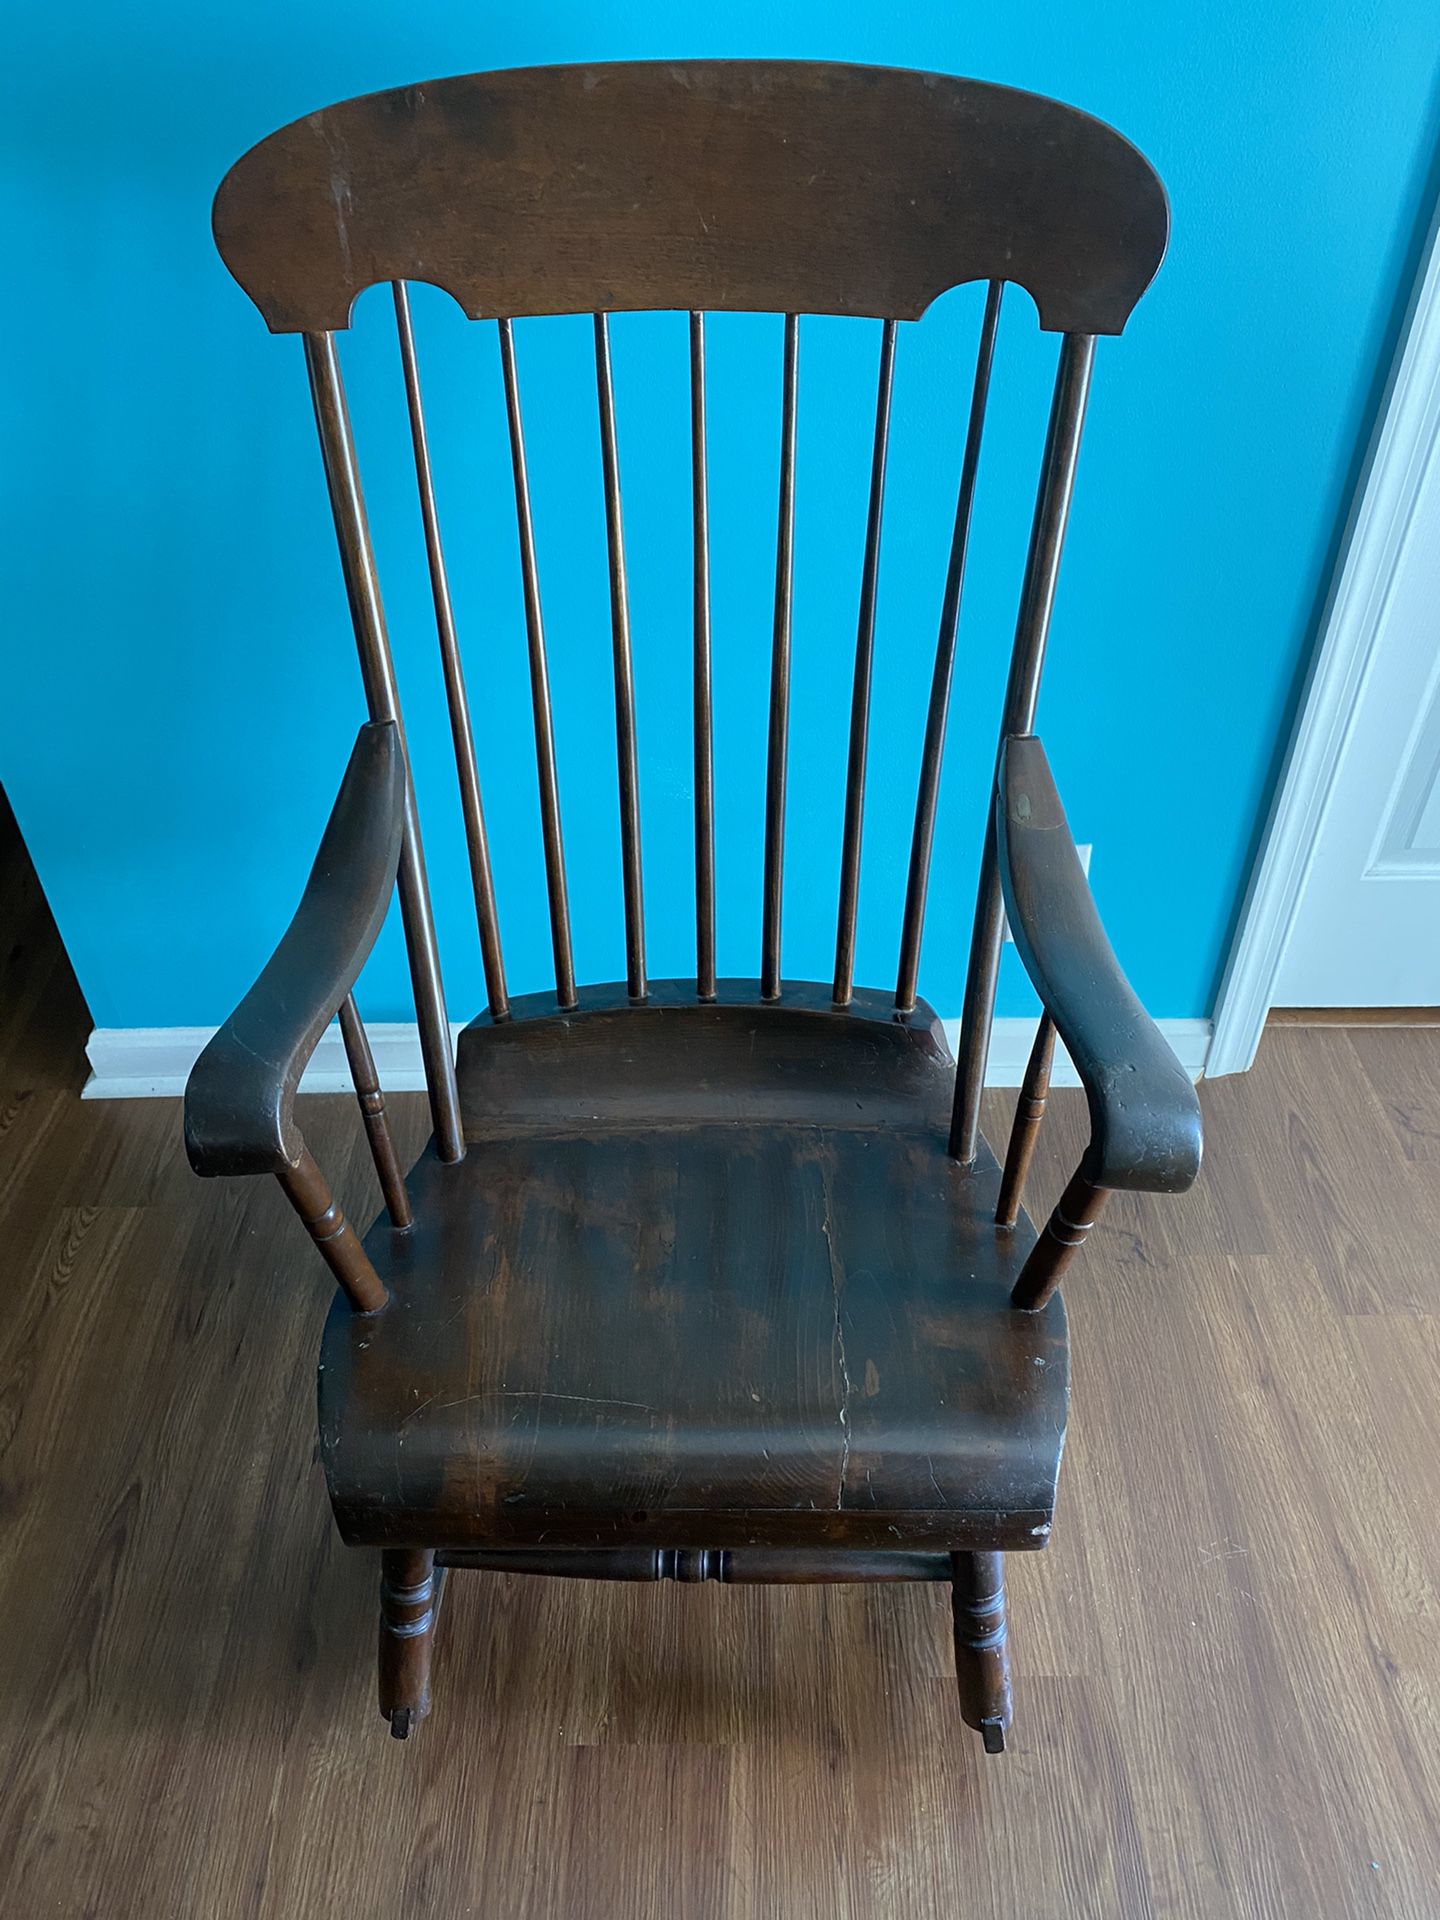 Old table and rocking chair